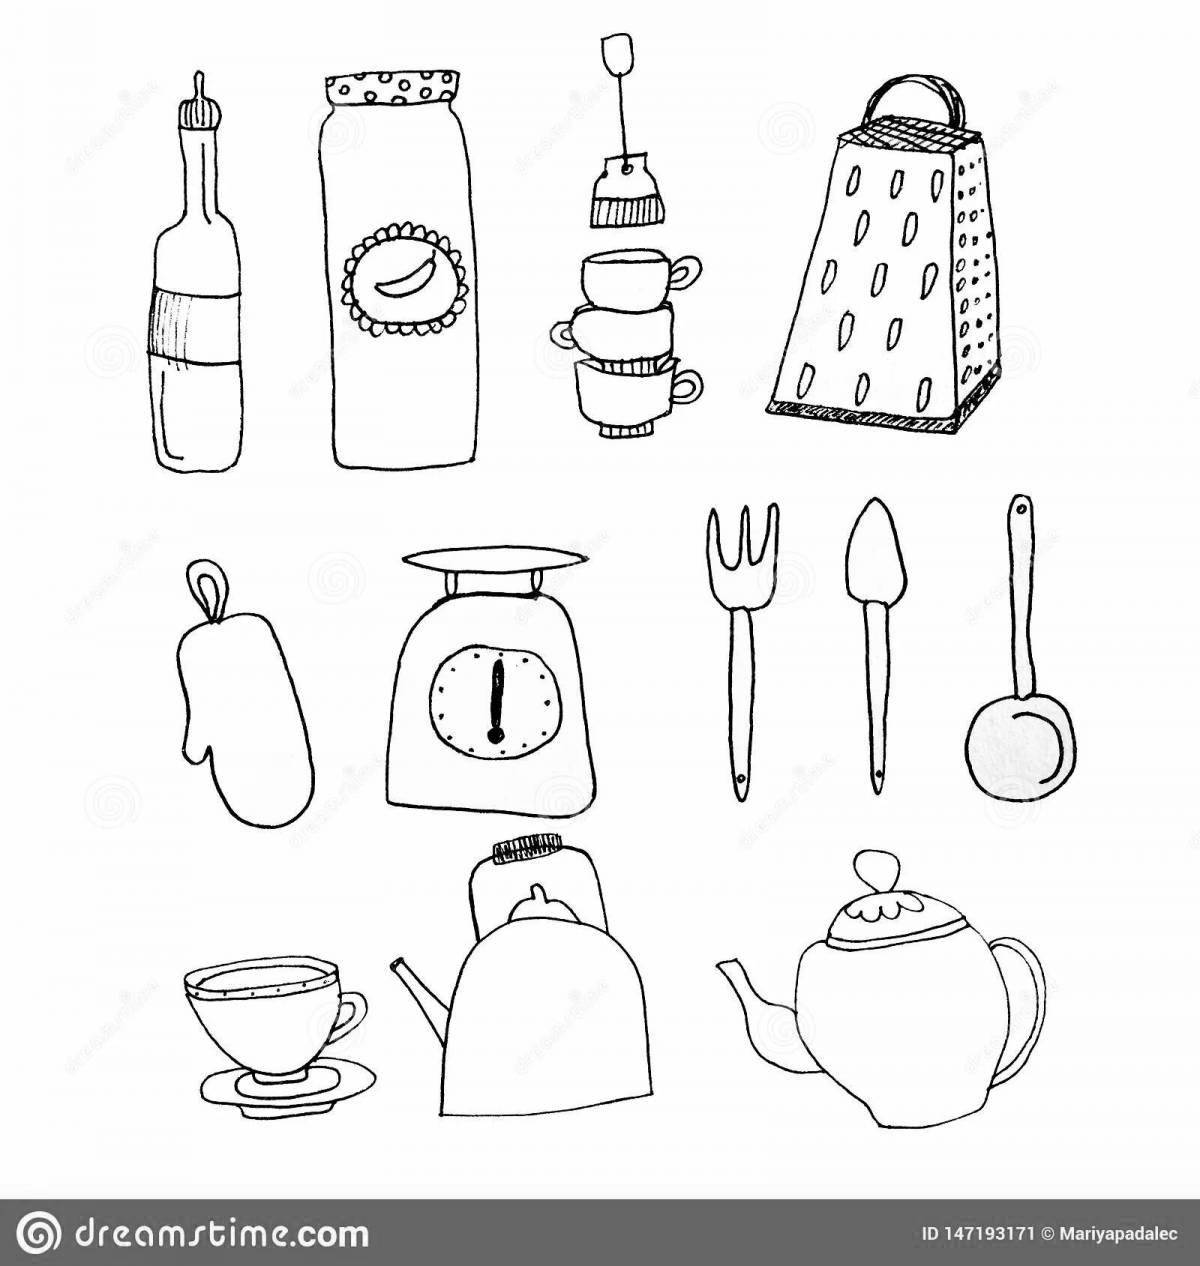 Fabulous kitchen utensils coloring book for kids